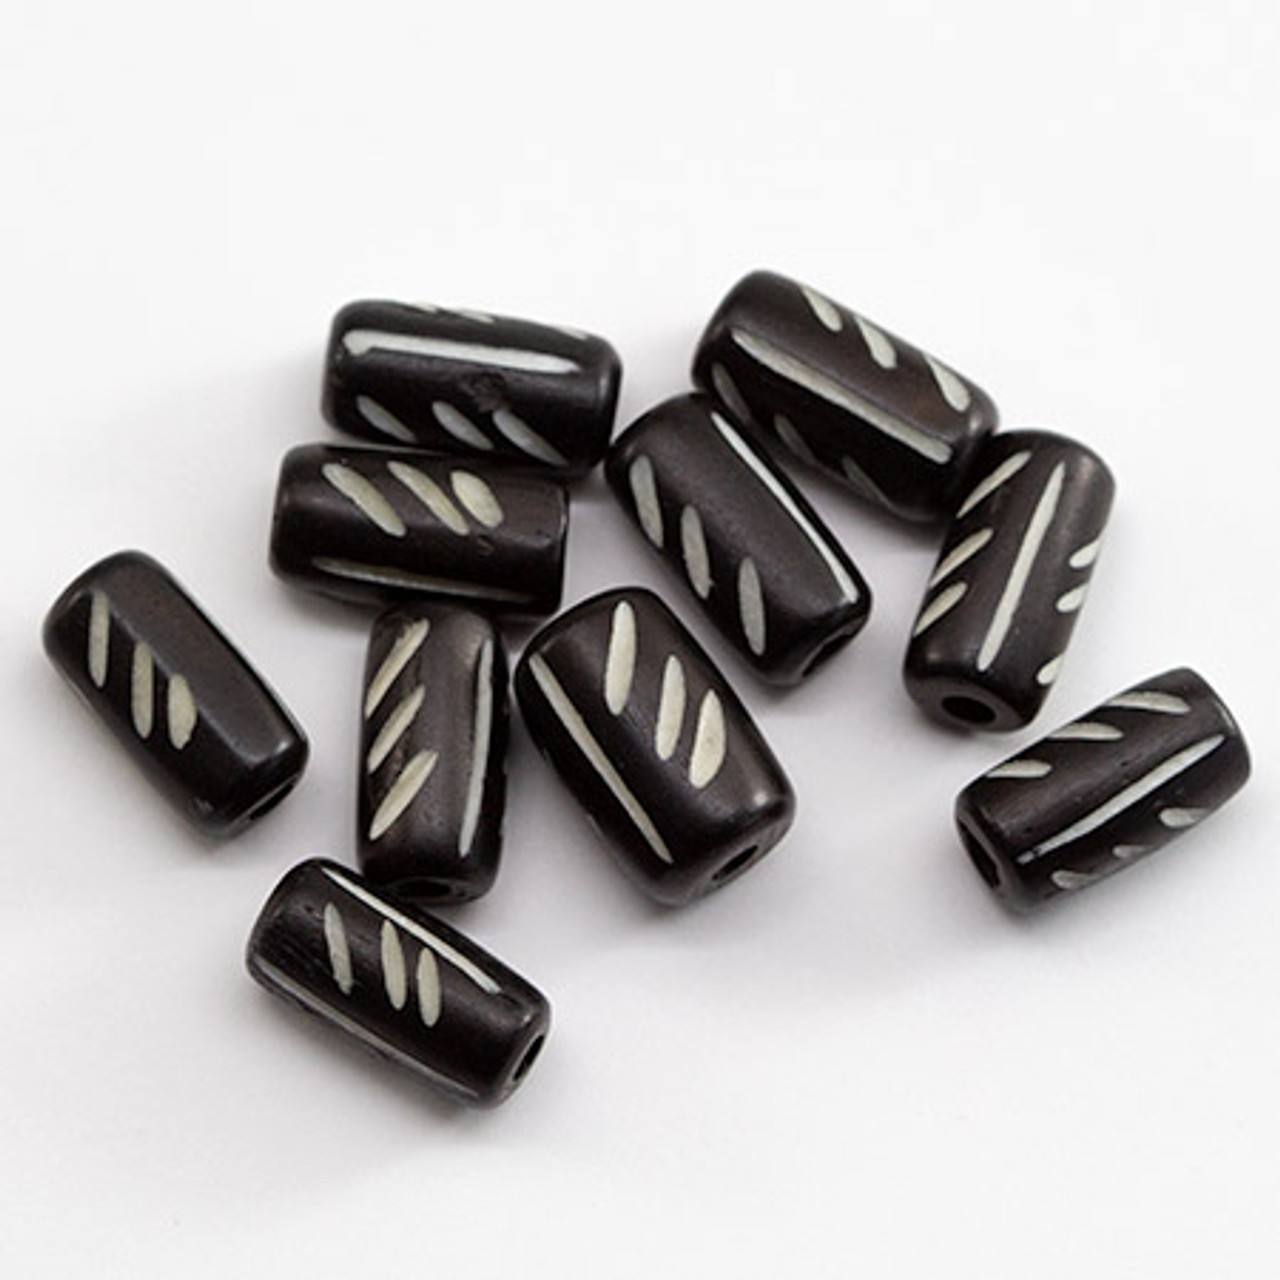 6 Pc, Silver Tube Spacers, Licorice Sliders, Licorice Spacers